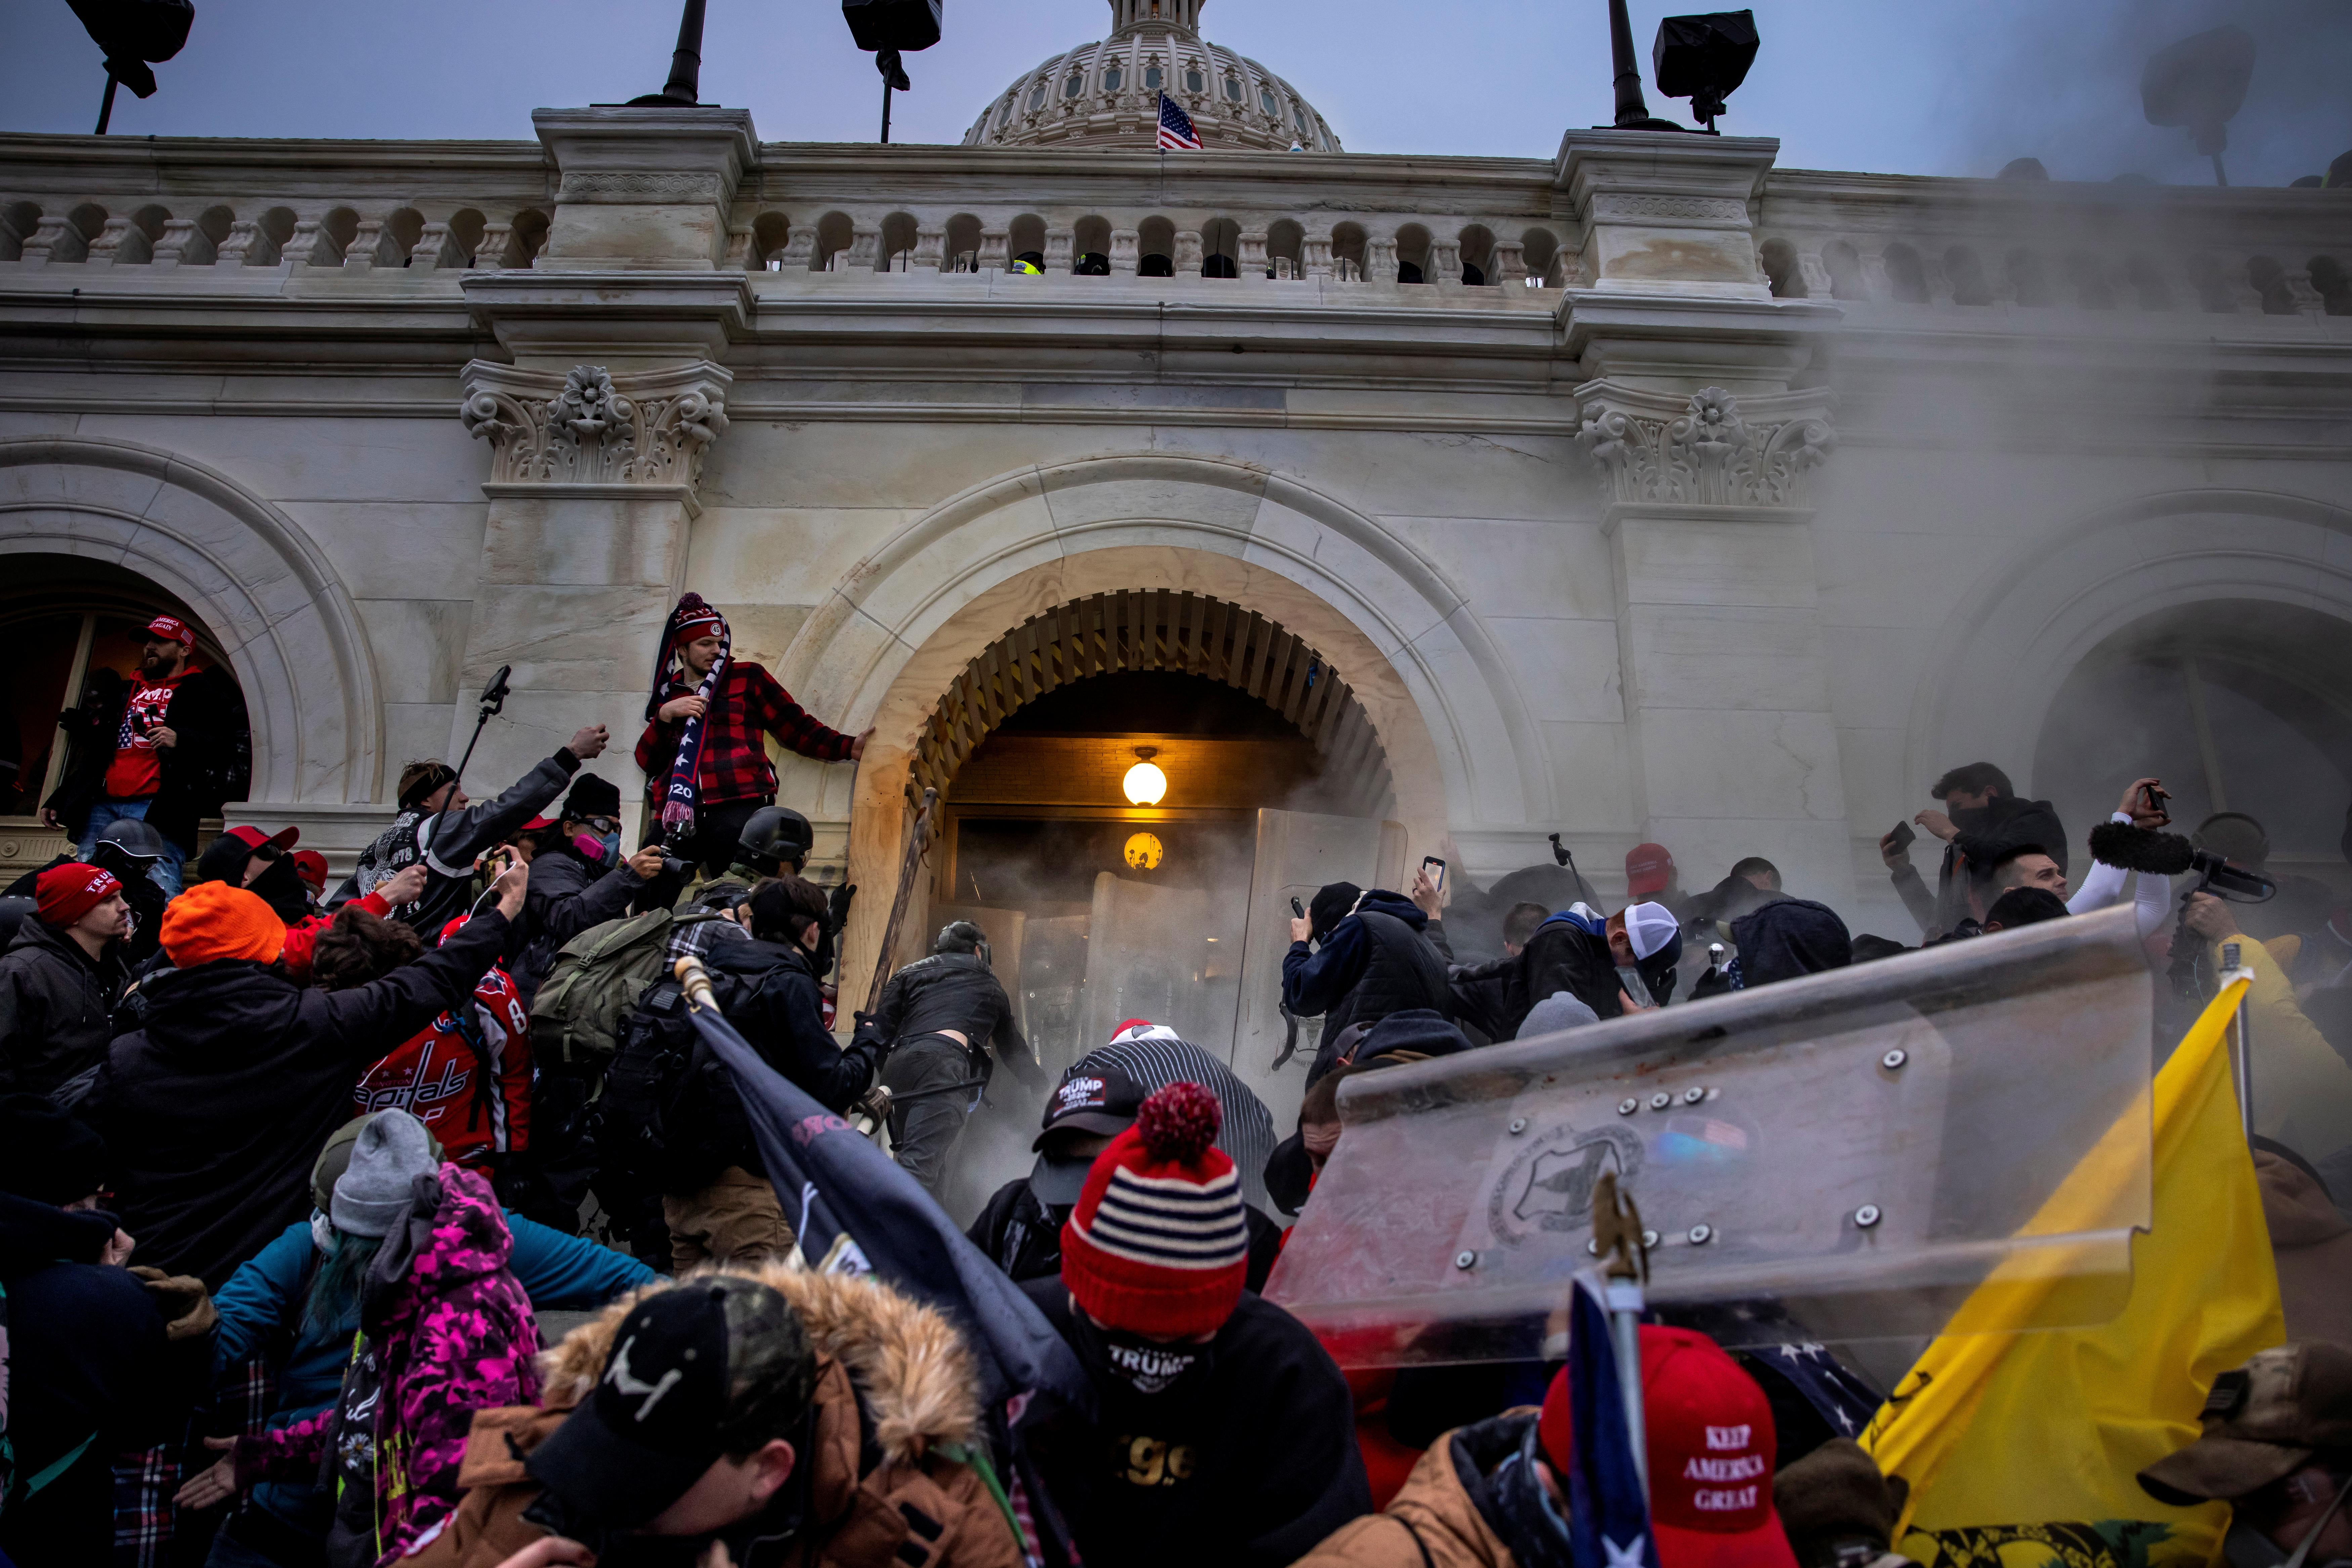 Trump supporters clash with police and security forces as people storm the Capitol on January 6, 2021 in Washington, D.C.